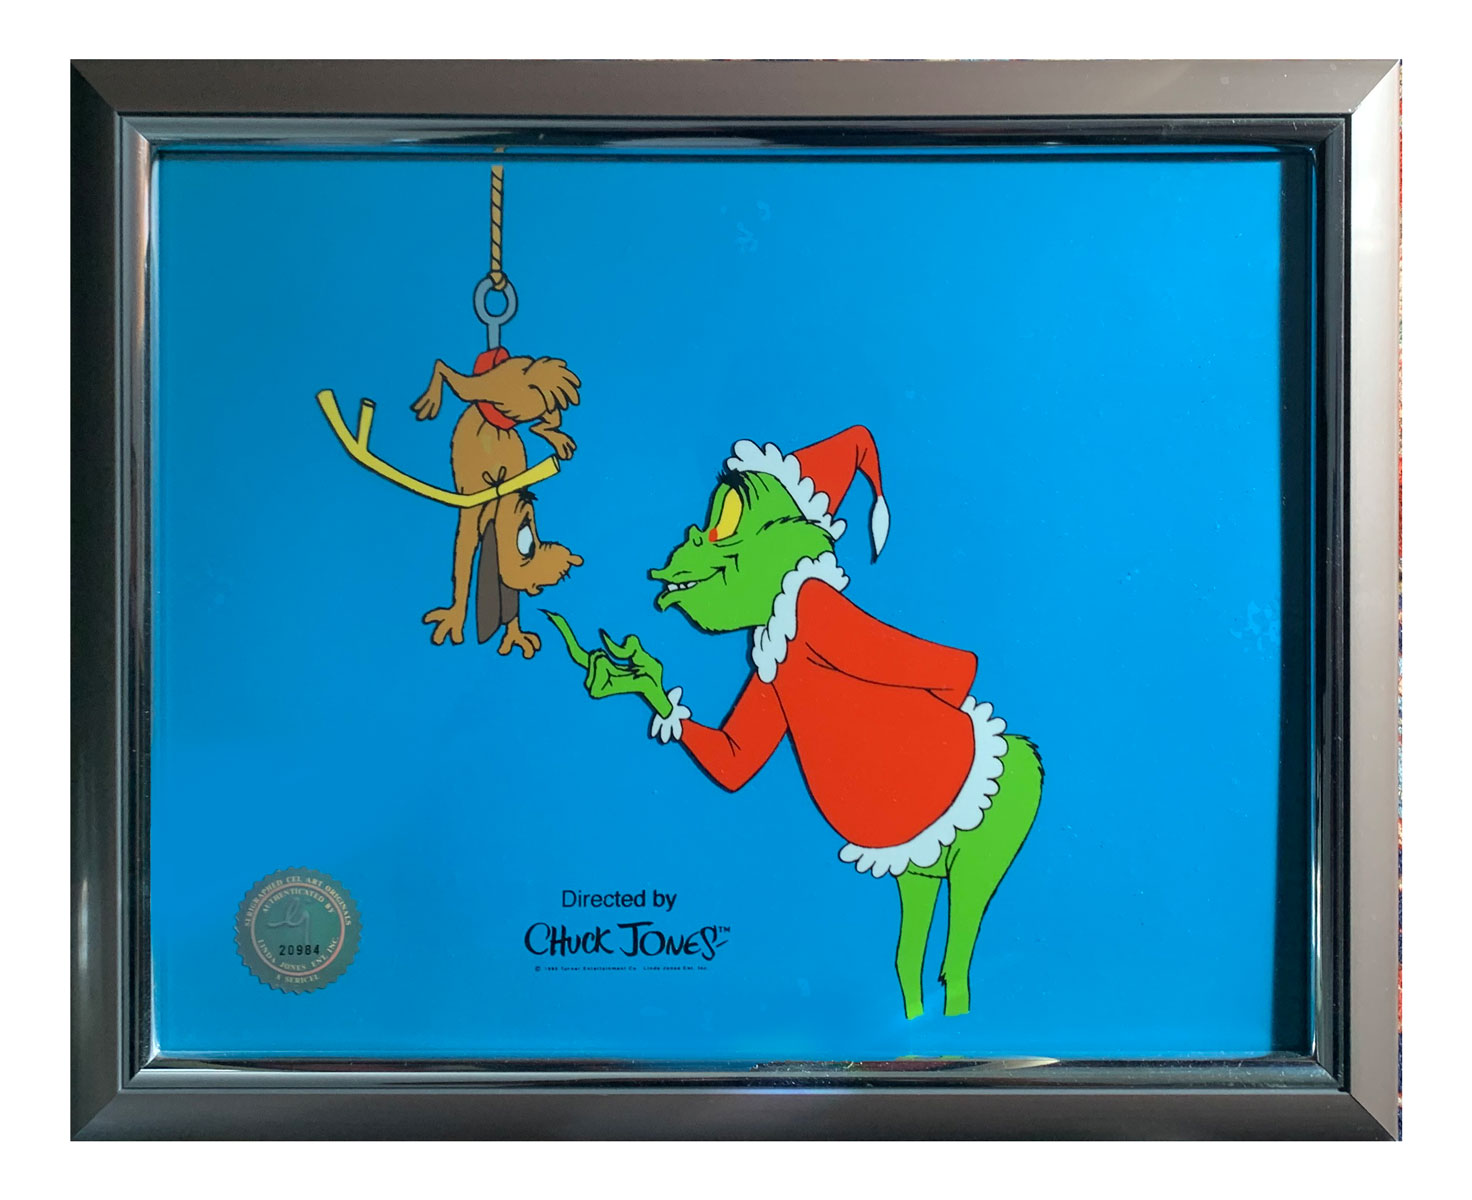 LIMITED EDITION SERIGRAPHED CEL